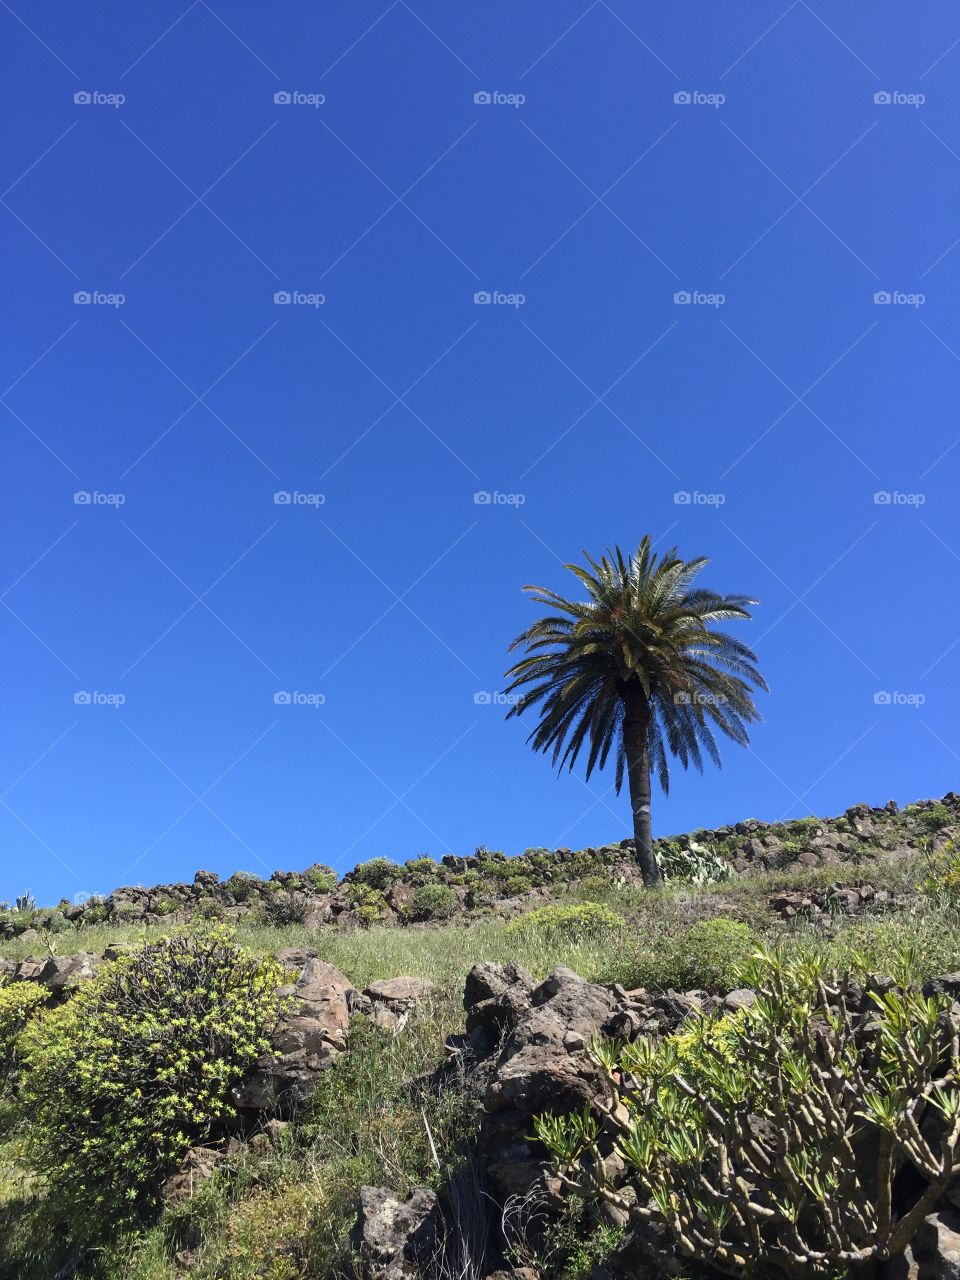 Blue, Blue sky in the Mountains  - with a single Palm tree in the front 